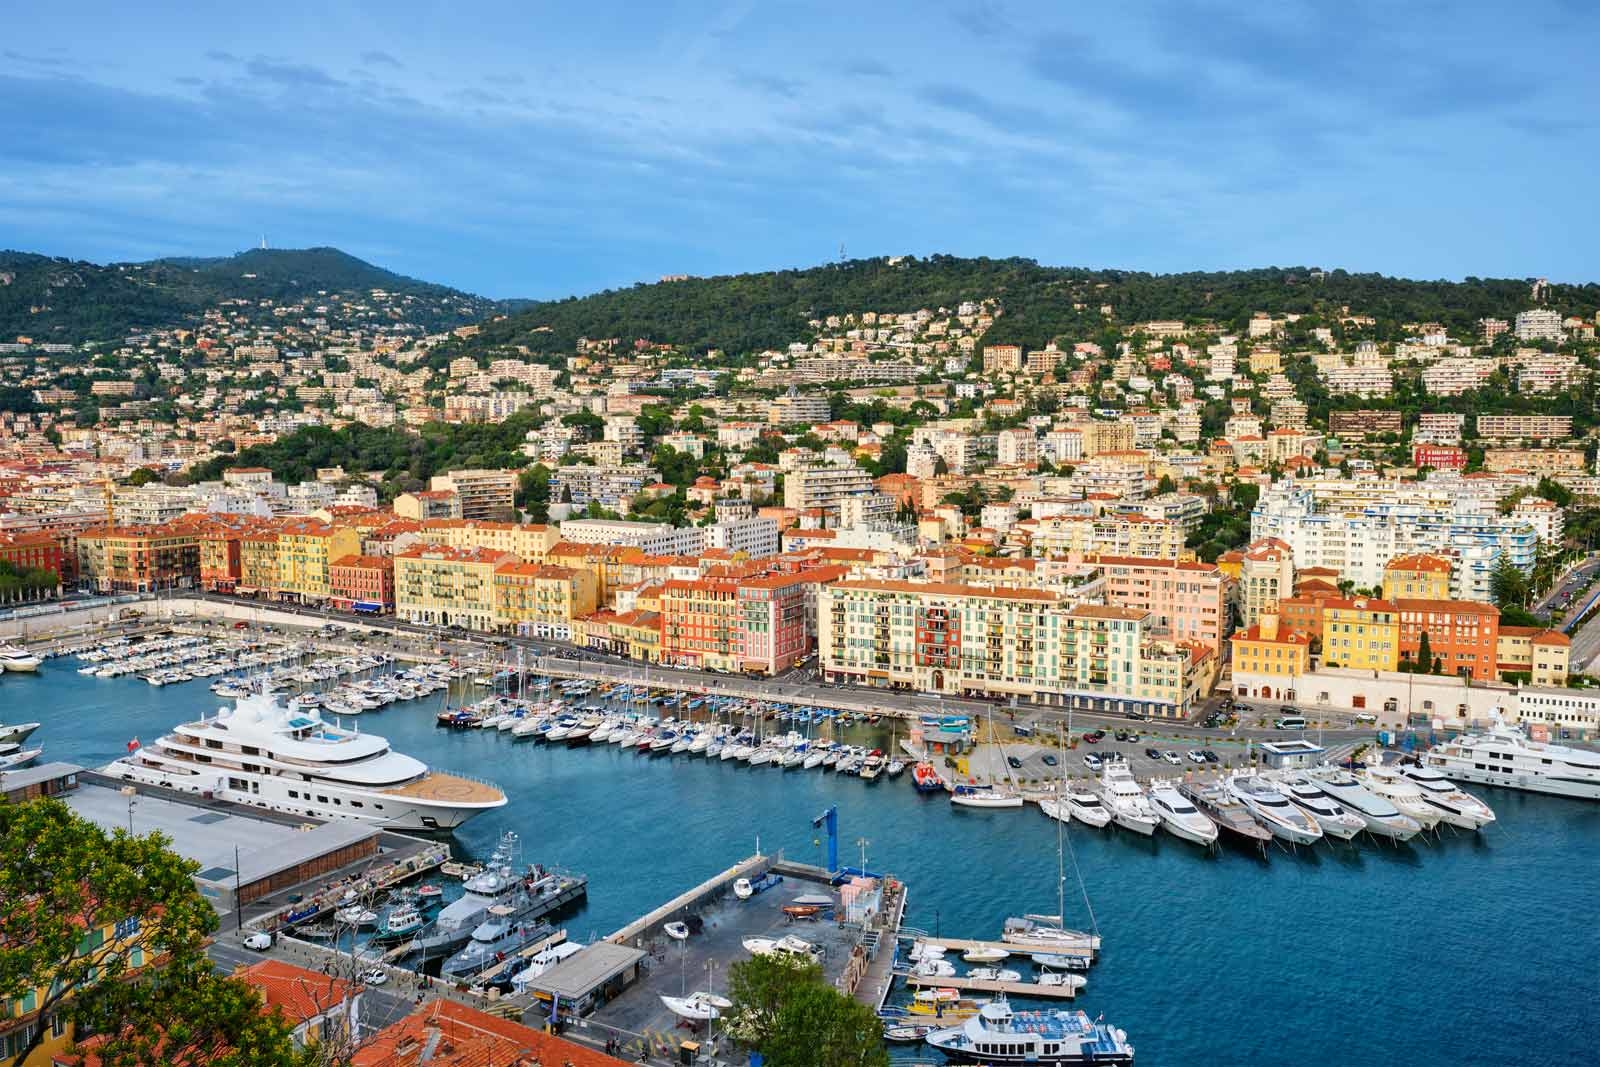 bet places to visit in the south of france